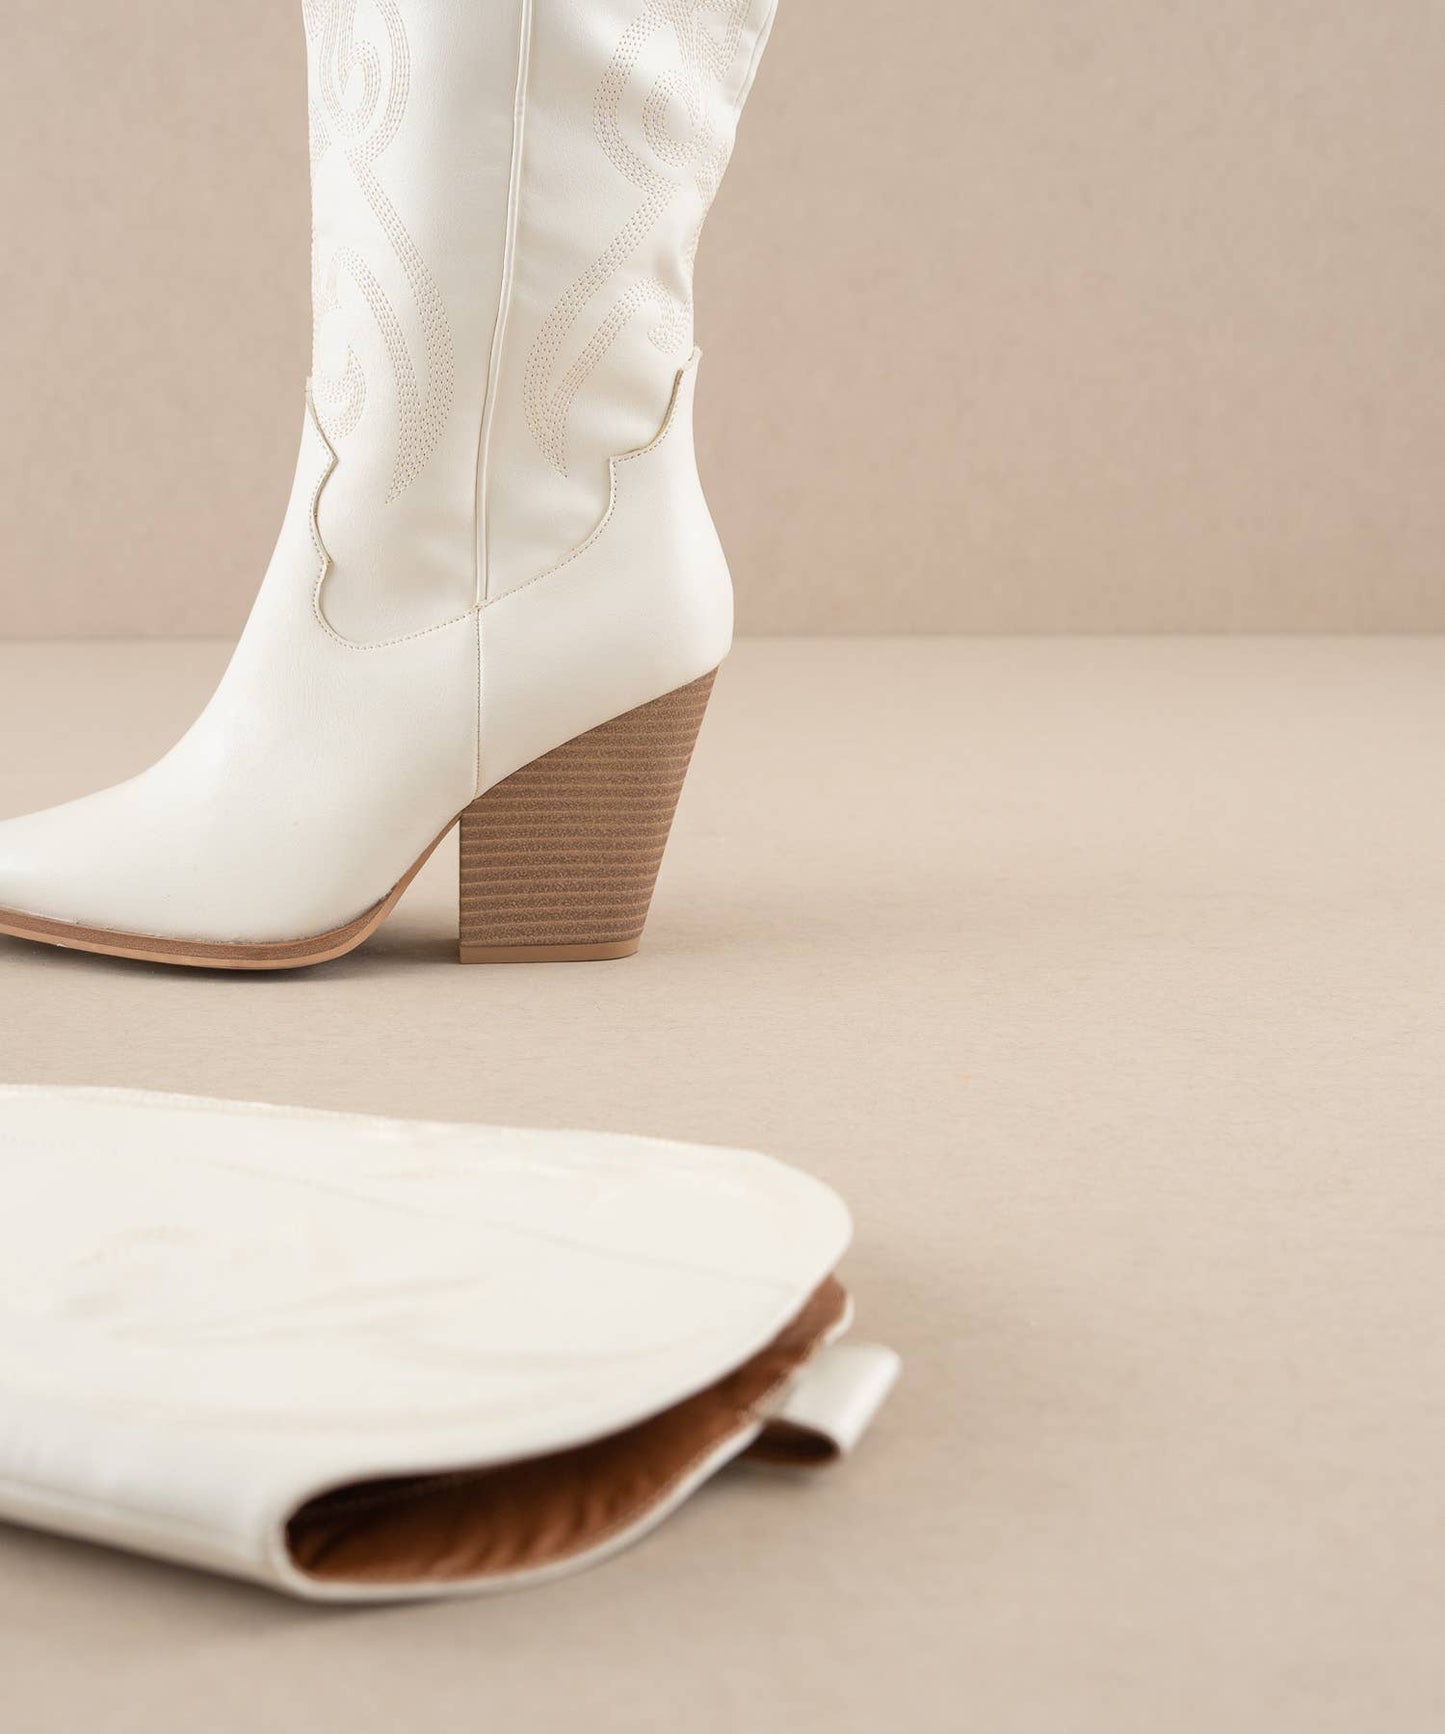 Oasis Society - The Astrid White | Knee High Embroidered Cowboy Boot